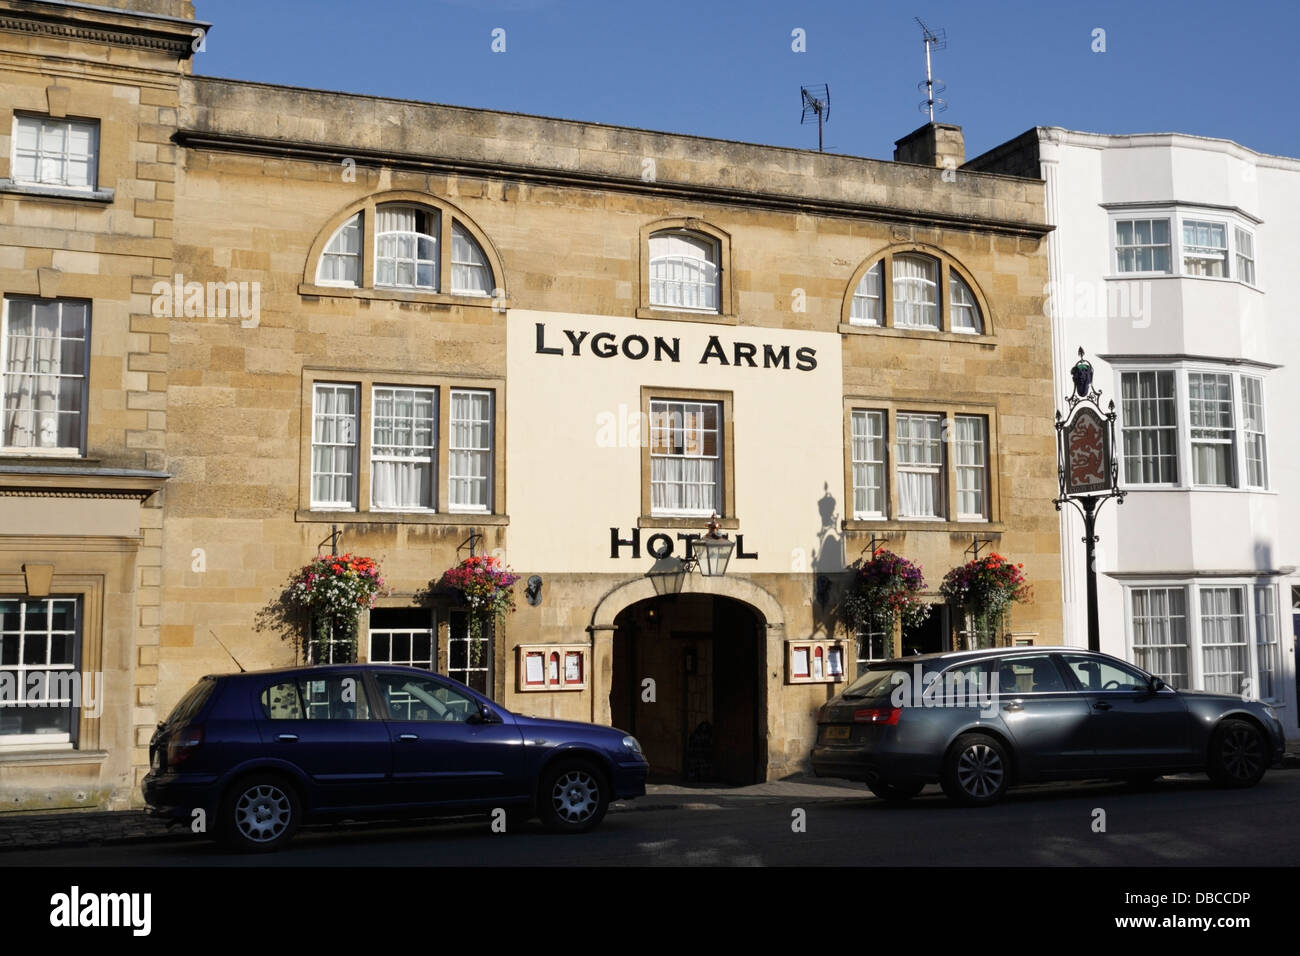 Lygon Arms Hotel in Chipping Campden High Street. England UK, Rural market town Stock Photo